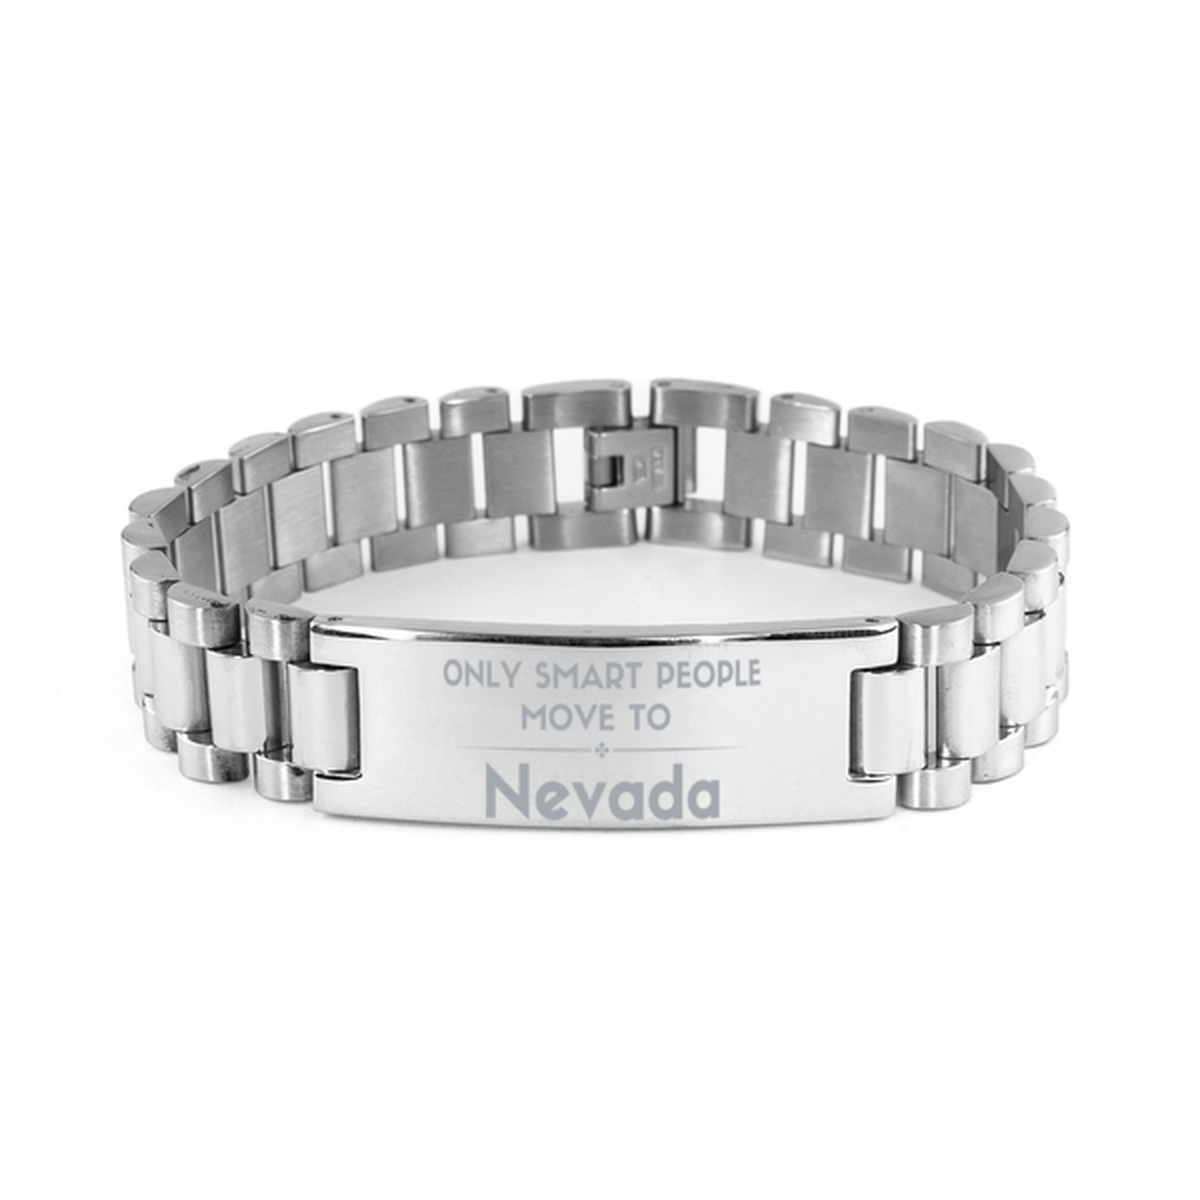 Only smart people move to Nevada Ladder Stainless Steel Bracelet, Gag Gifts For Nevada, Move to Nevada Gifts for Friends Coworker Funny Saying Quote